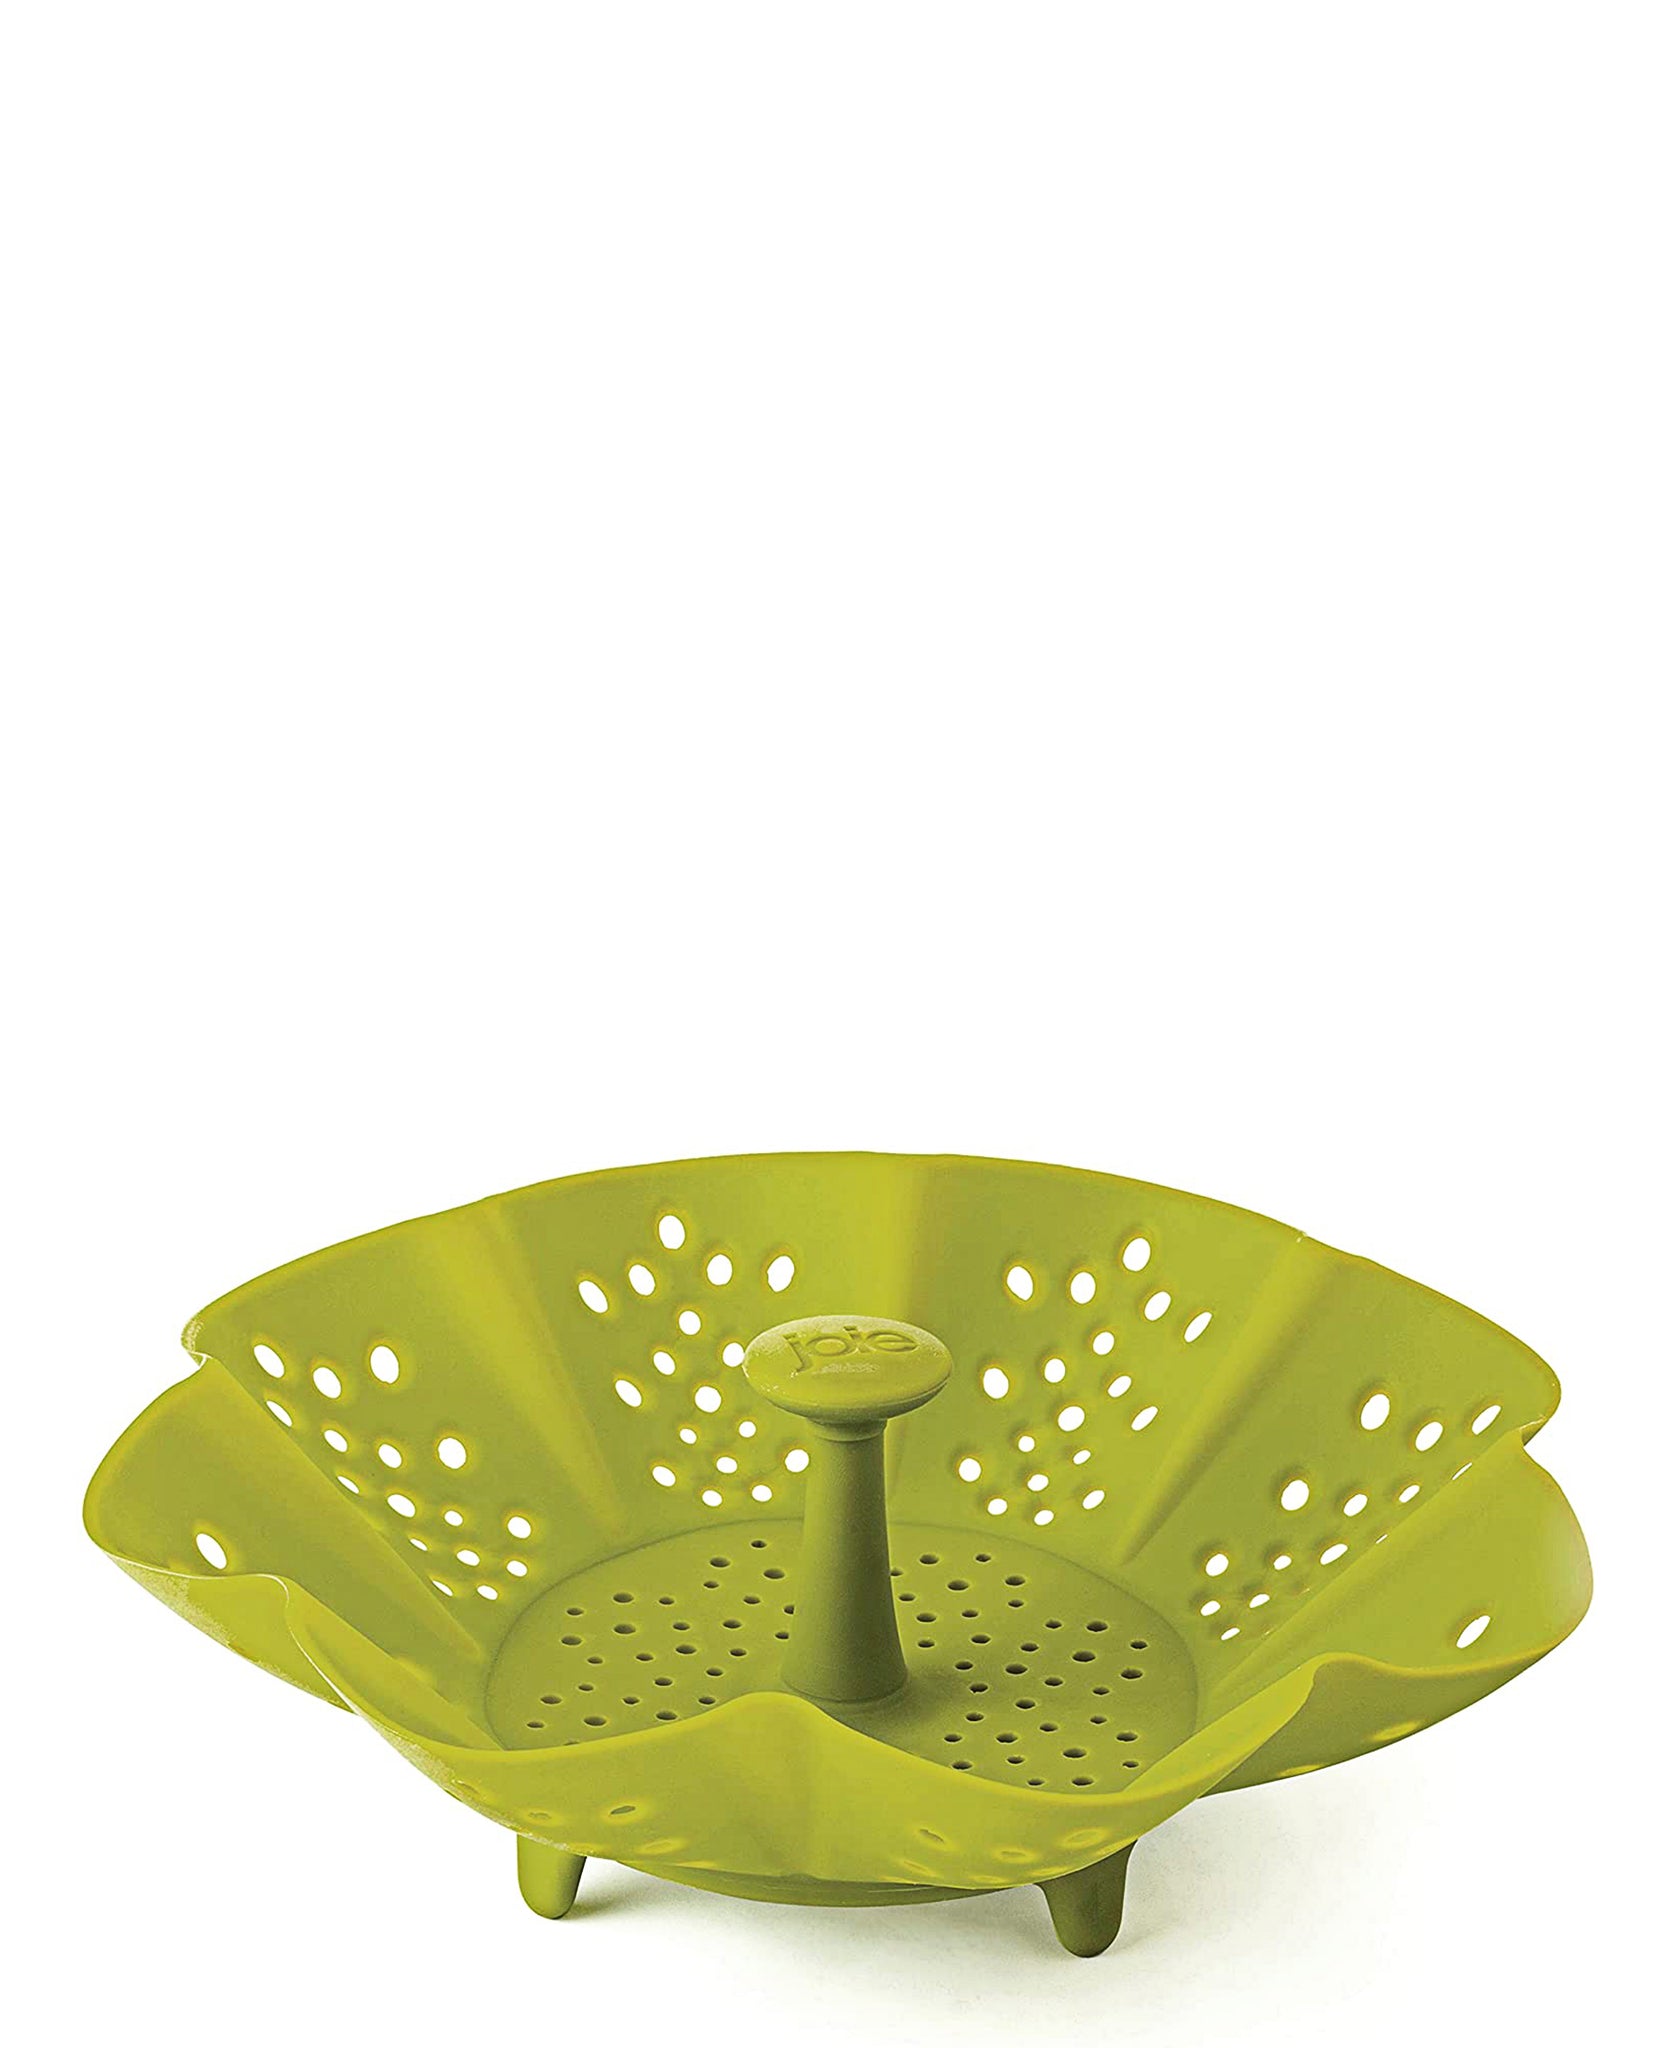 Joie Silicone Collapsible Steamer/Colander